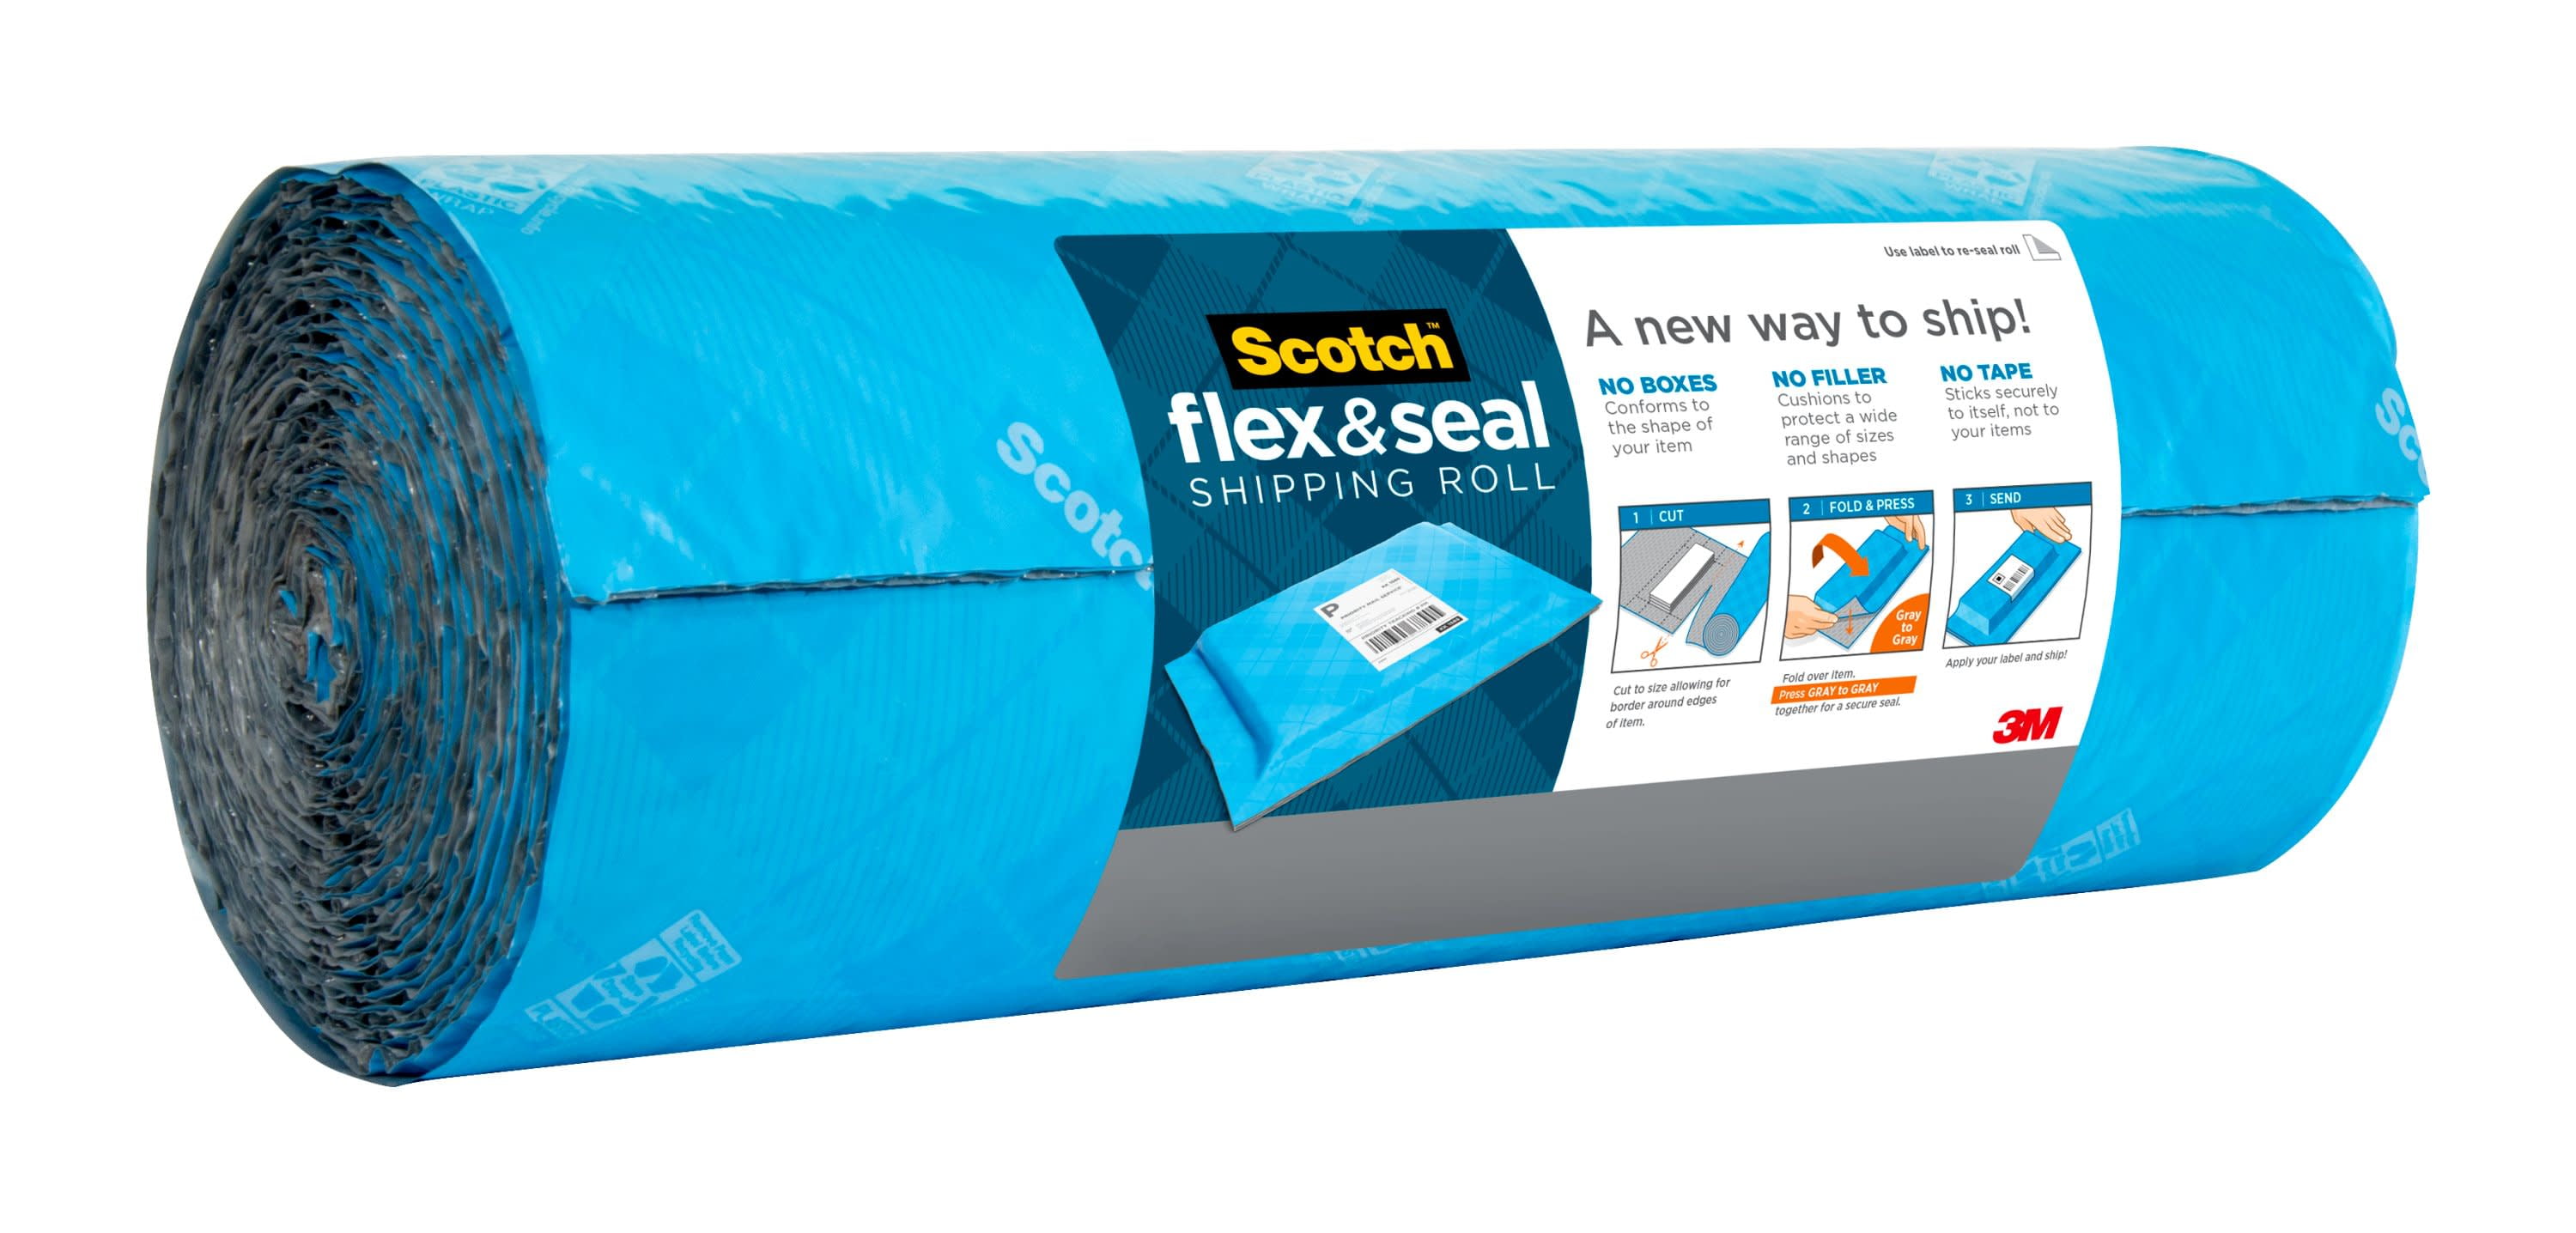 Scotch Flex & Seal Shipping Roll 4 Pack Cushioning Poly Bags 20 Ft x 15 in Bubble Mailers Simple Packaging Alternative to Cardboard Boxes 